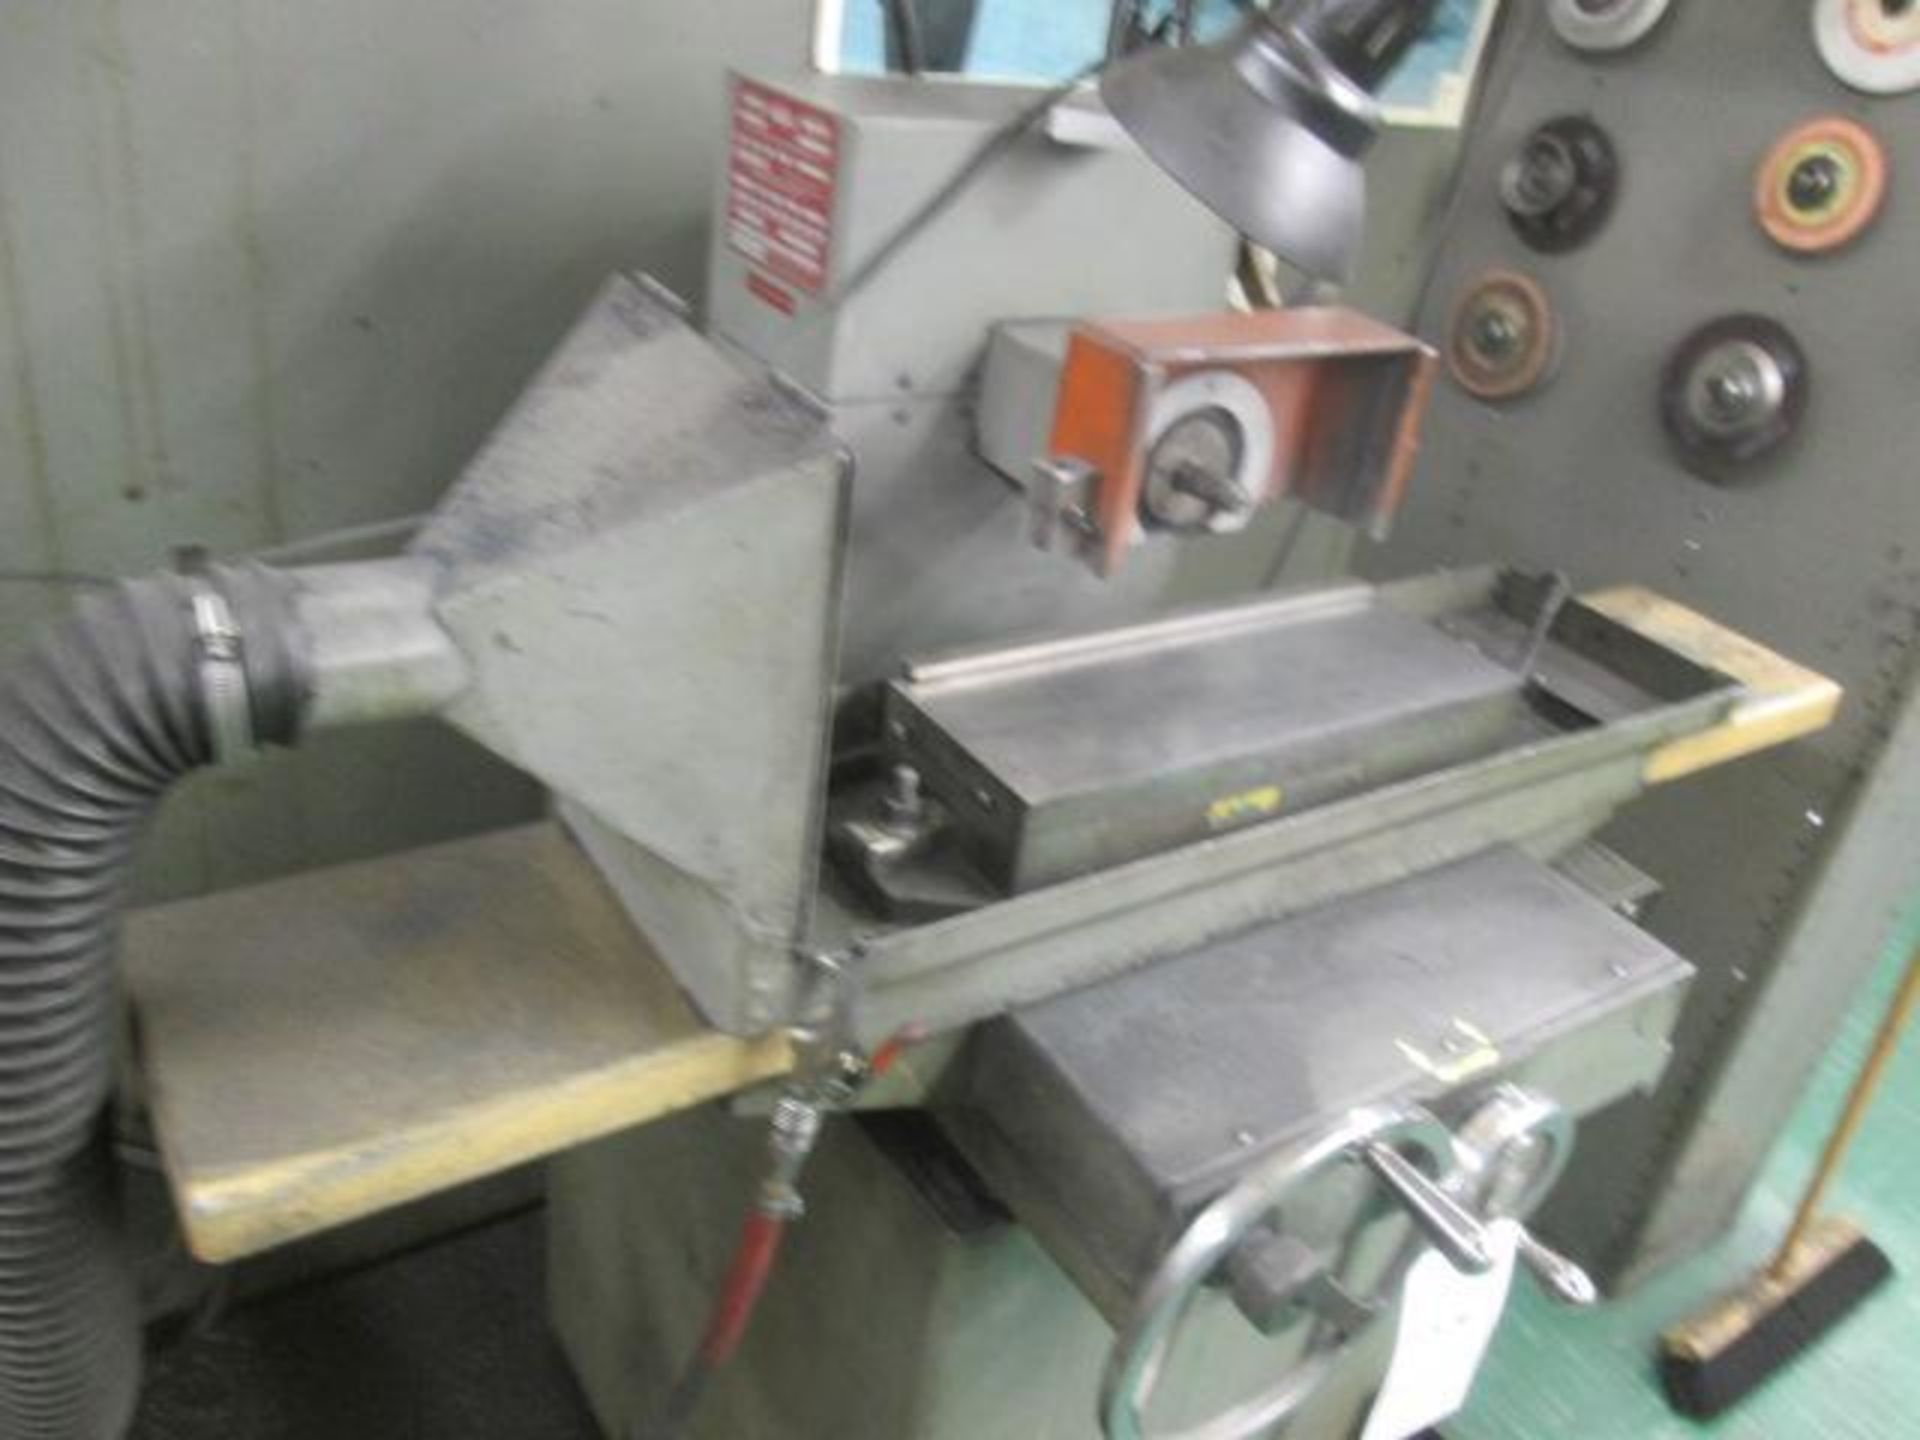 Doall 100 Surface Grinder - Image 3 of 4